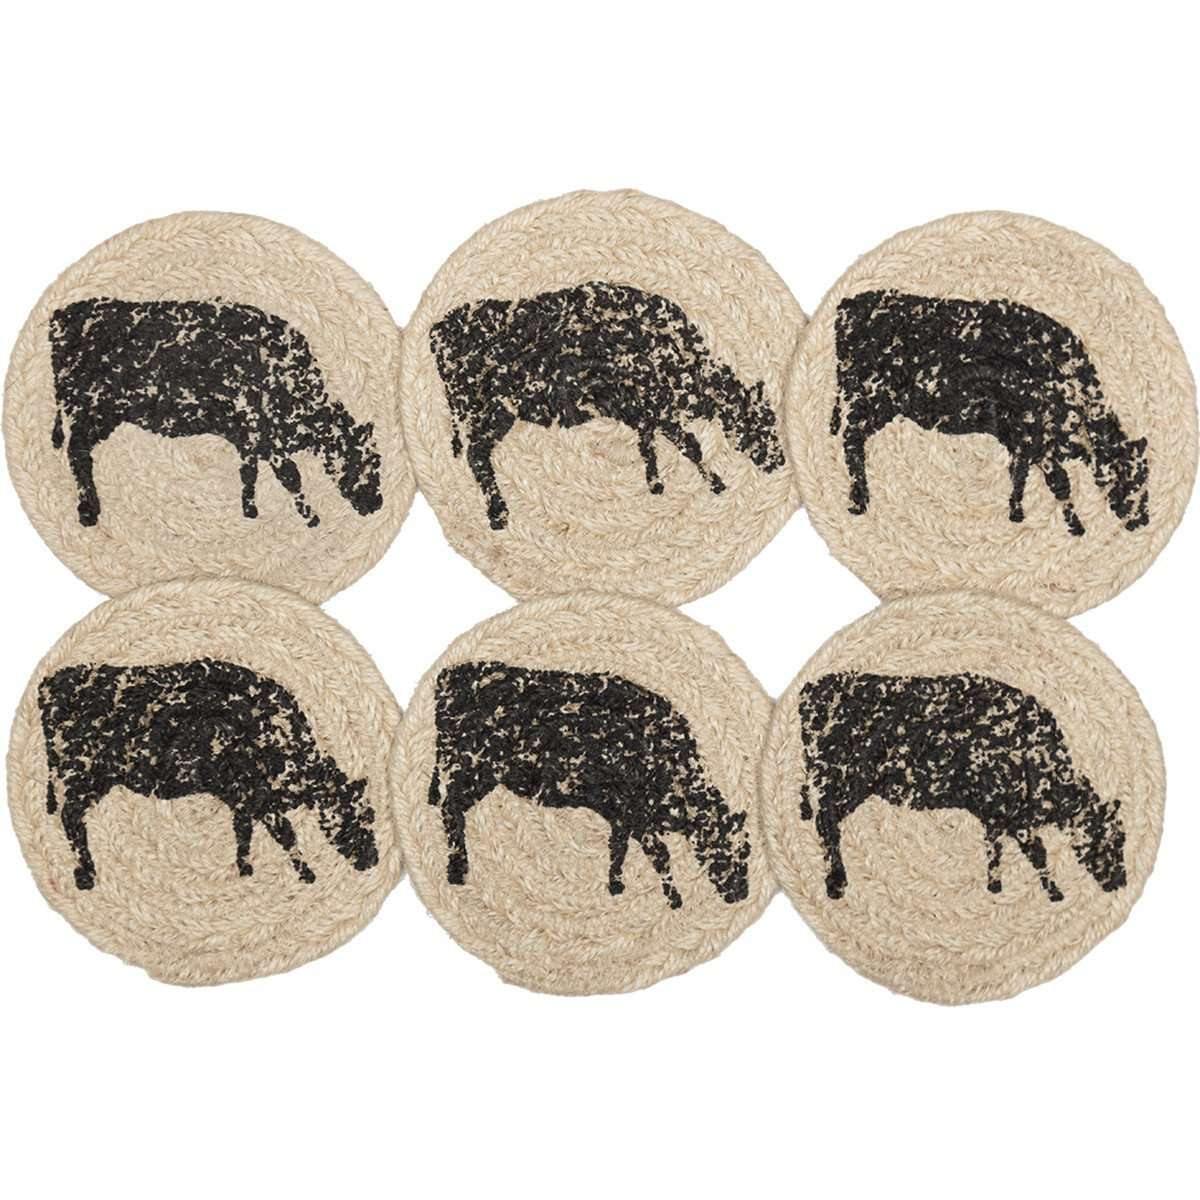 Sawyer Mill Charcoal Cow Jute Coaster Set of 6 VHC Brands